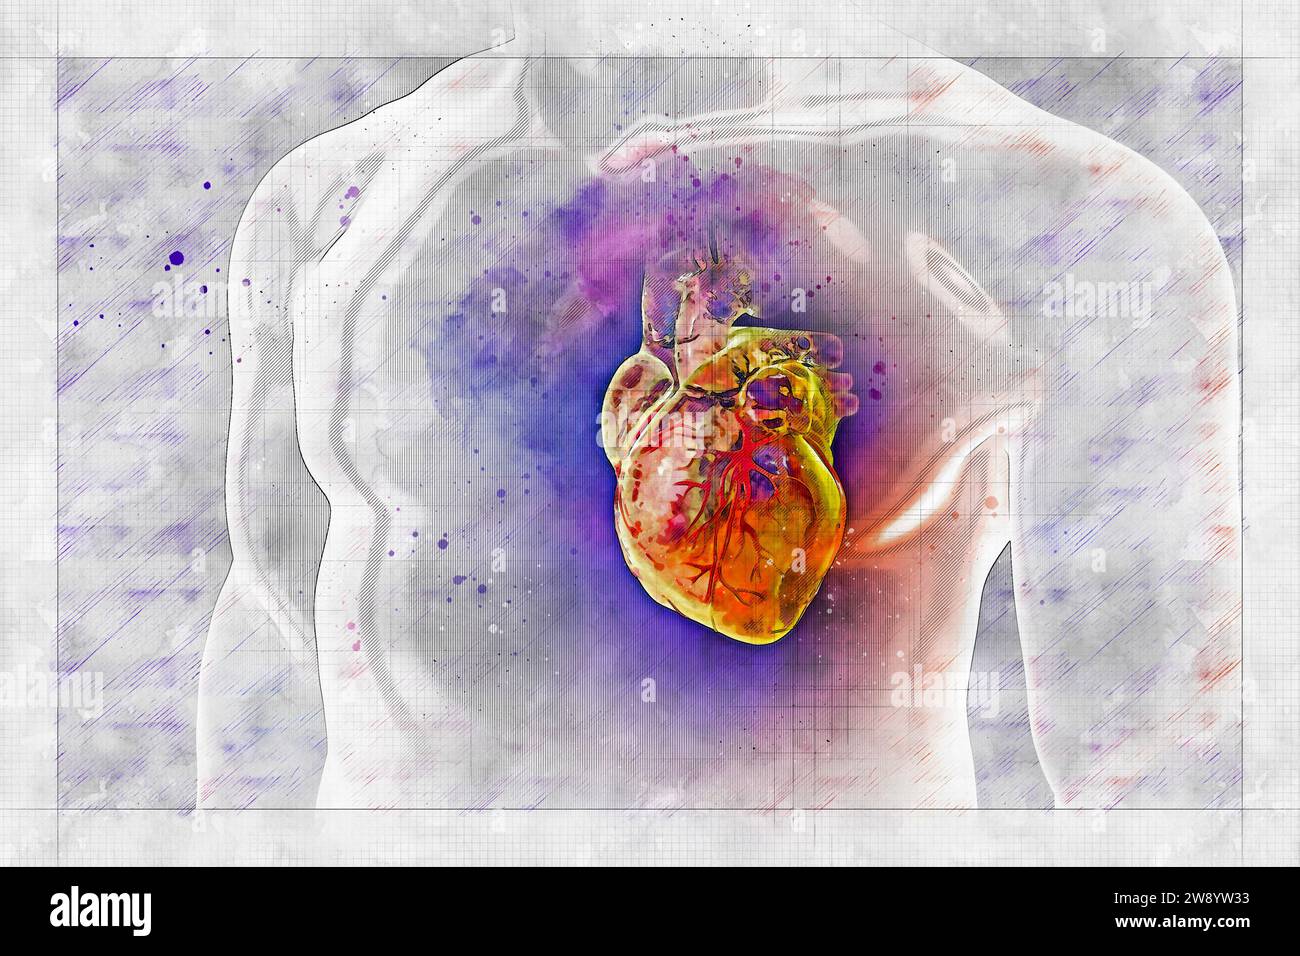 Human heart with blood vessels, illustration Stock Photo